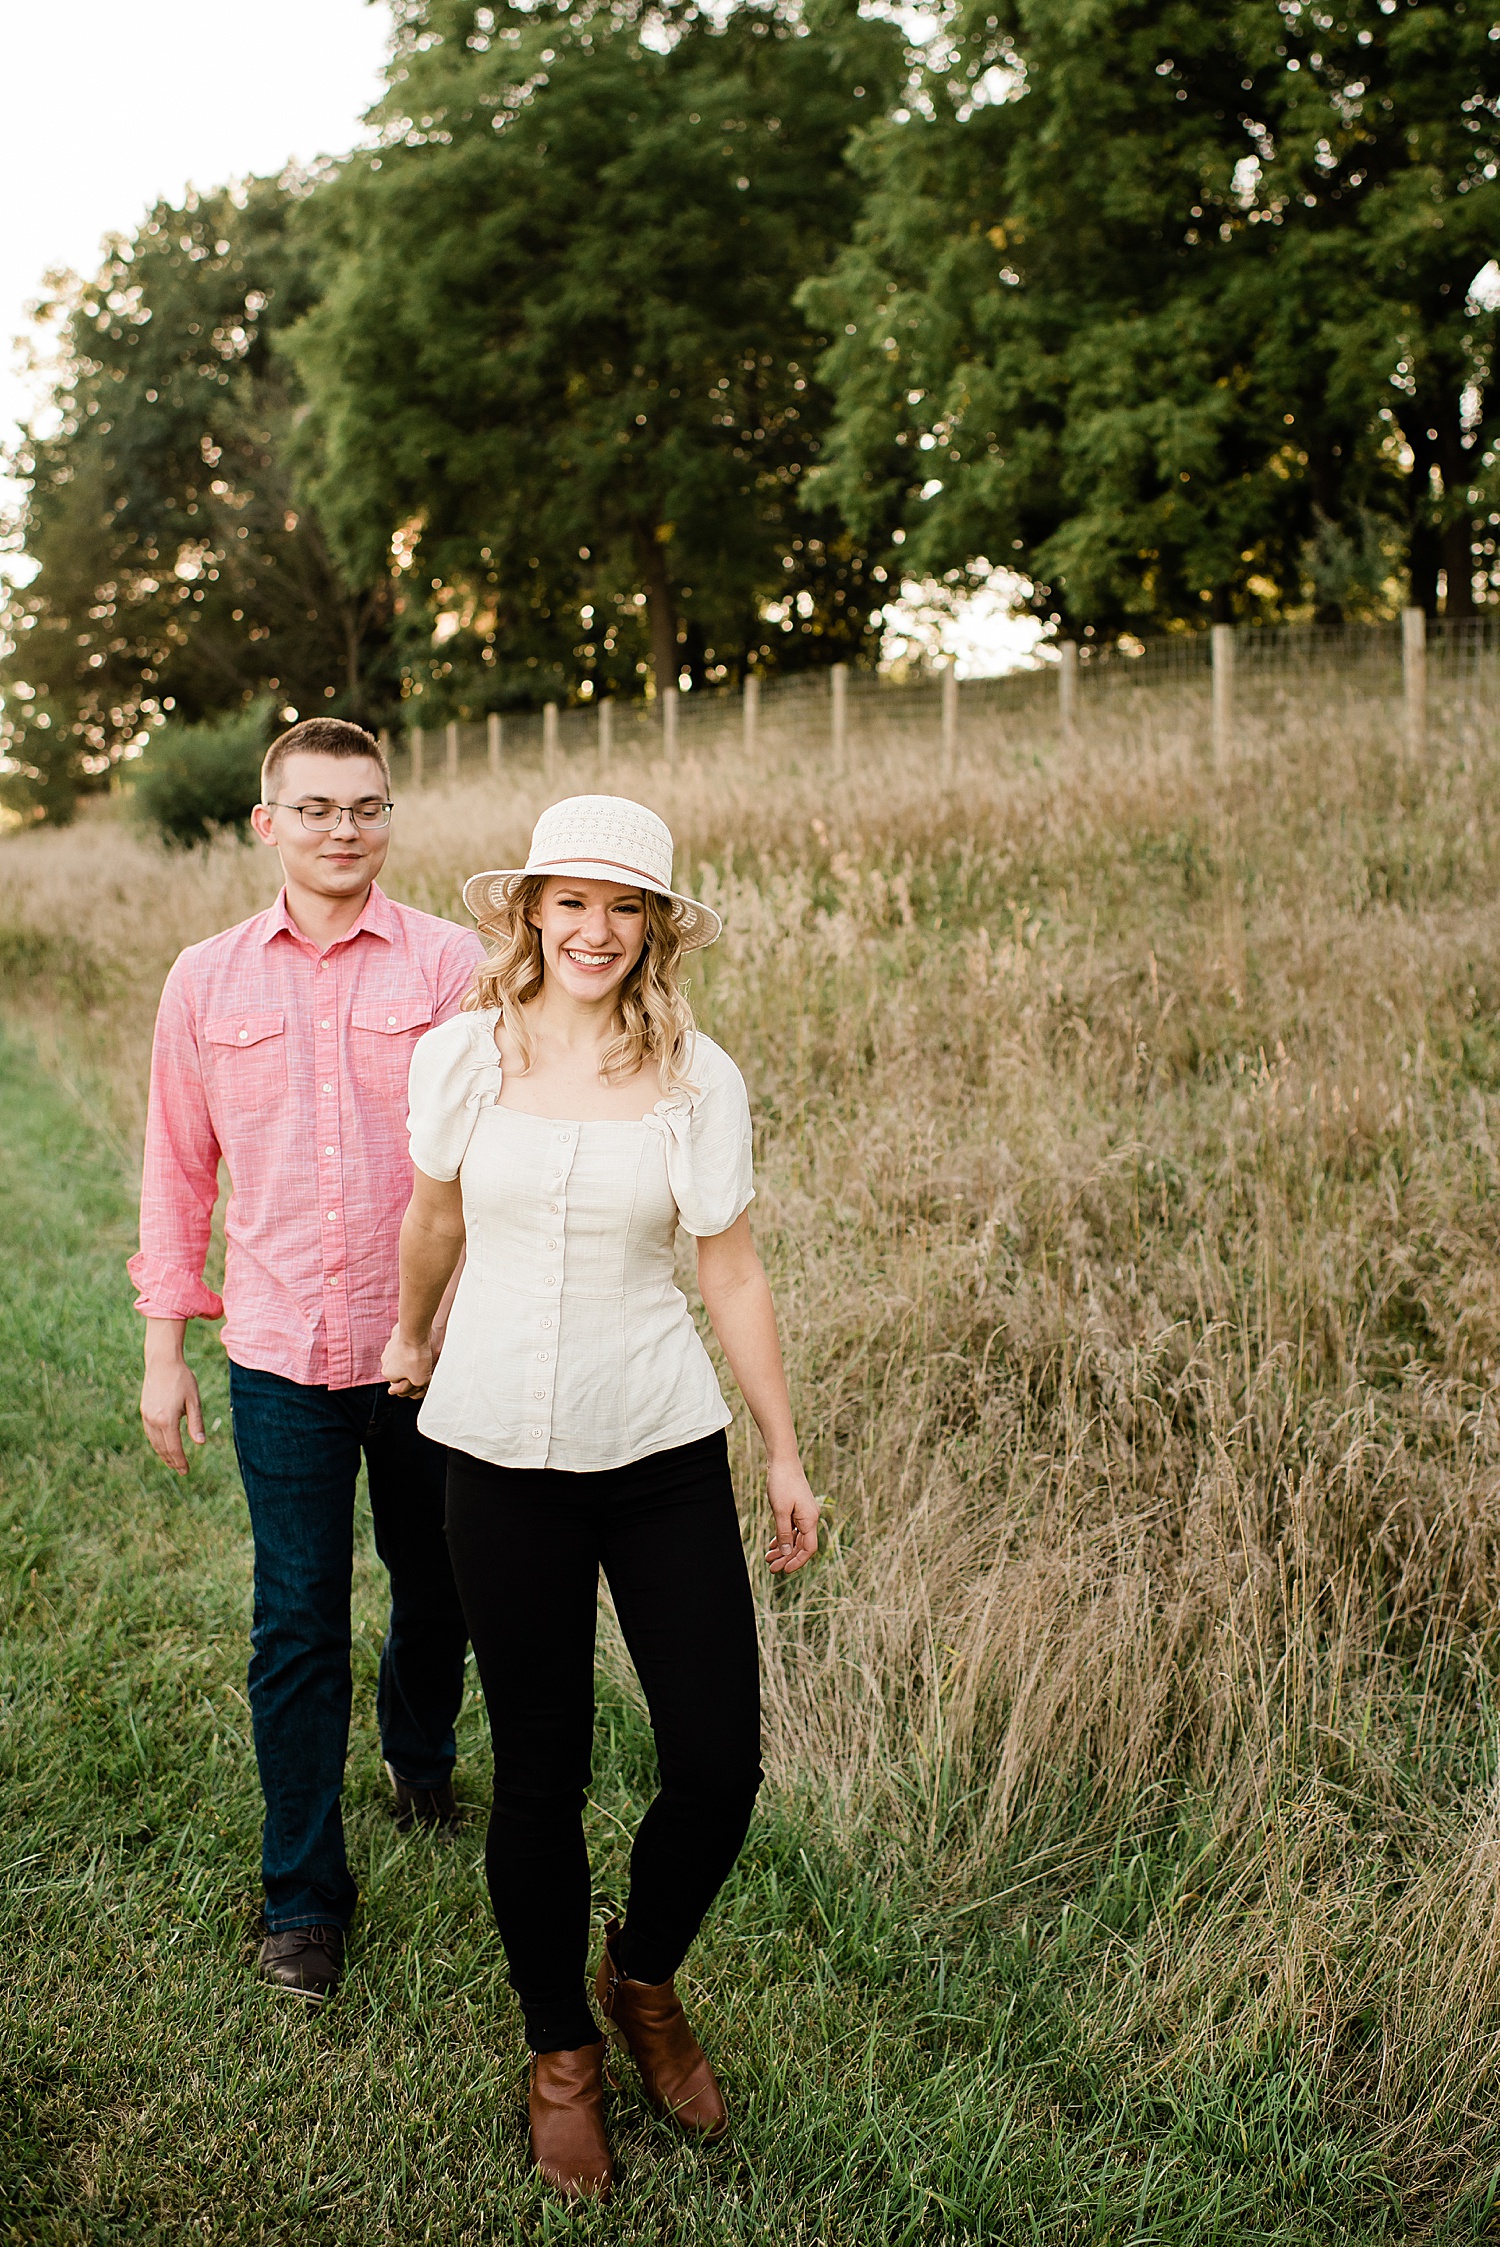 happily engaged couple wearing white hat in park in Michigan